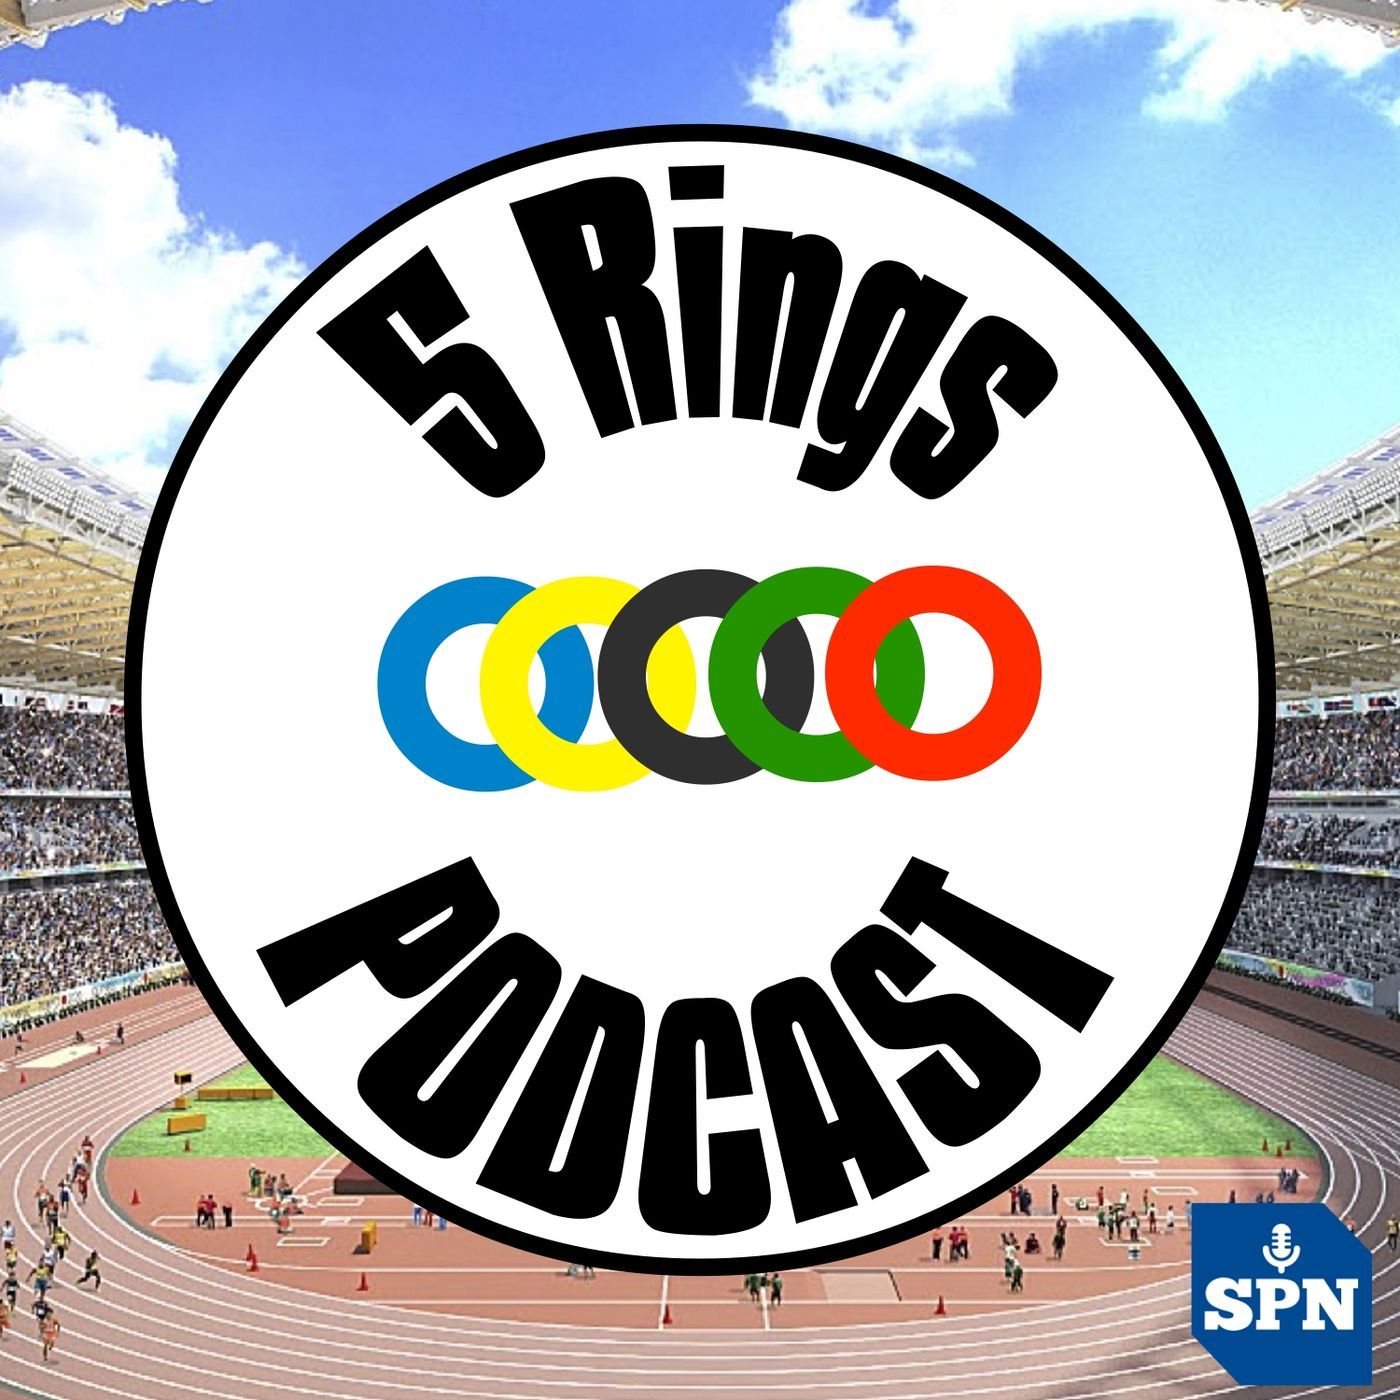 5 Rings Podcast - Daily Coverage of Tokyo 2020 with Kevin Laramee and Duane Rollins - Day 12 Review